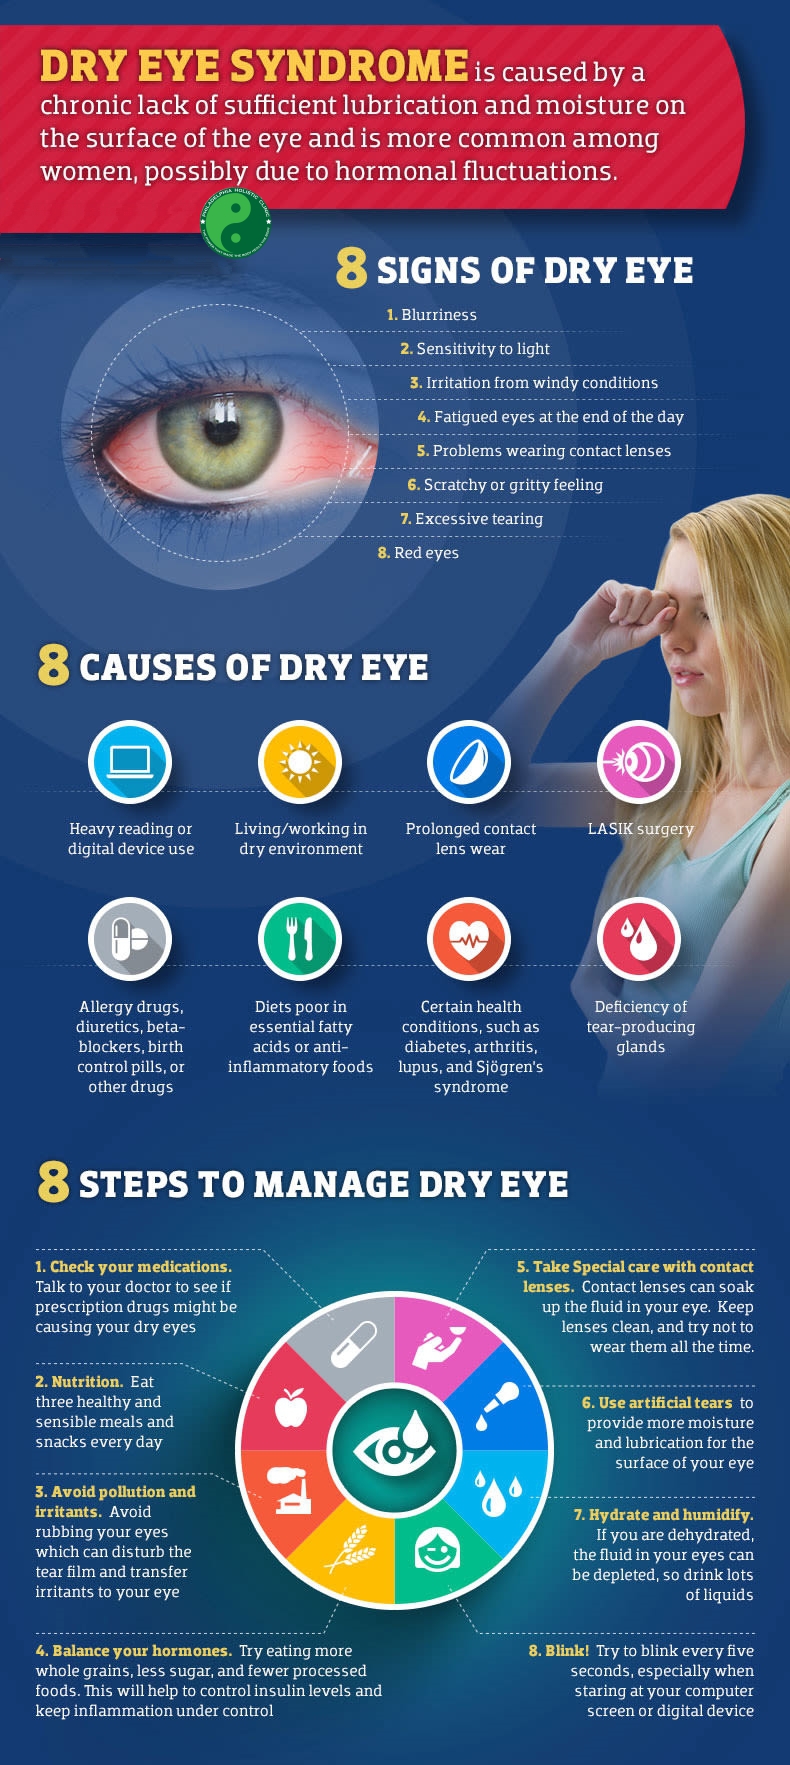 Treatment for Dry Eyes